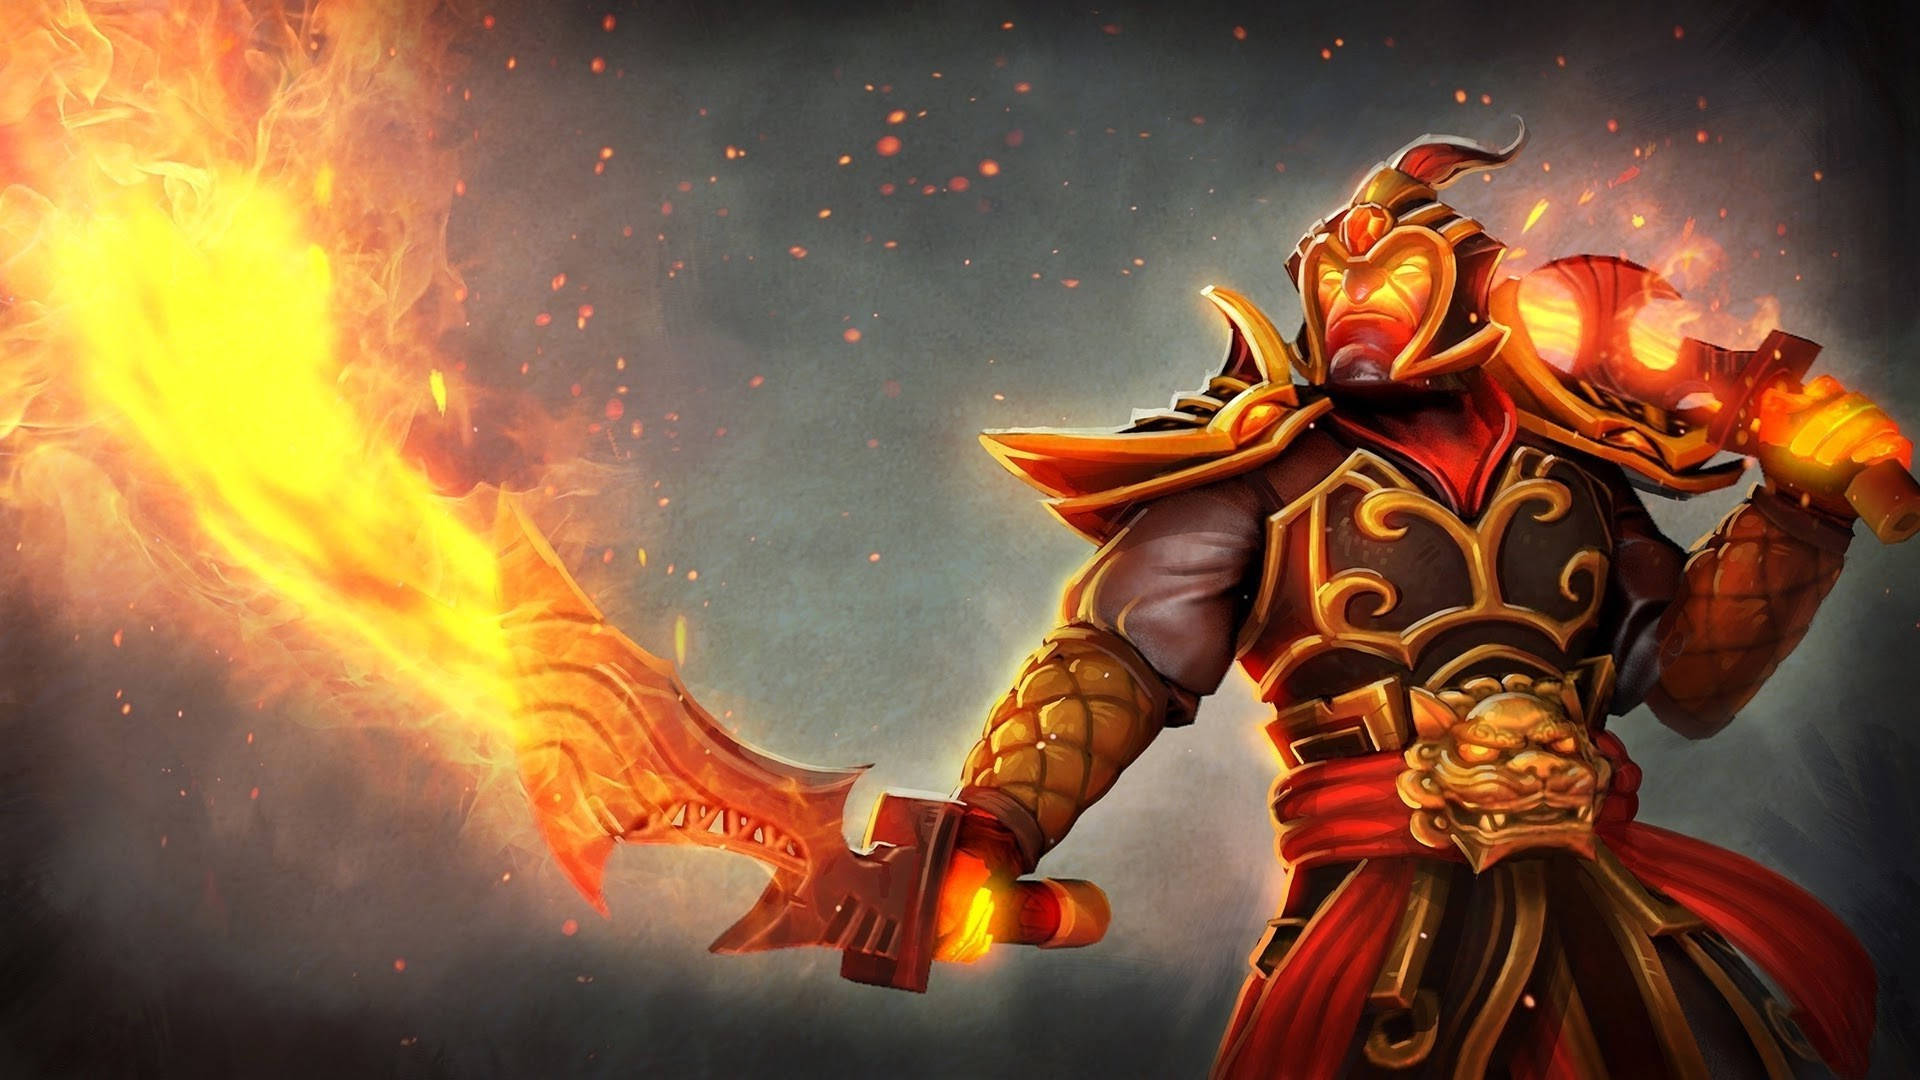 Experience the world of Dota 2 on your Desktop Wallpaper